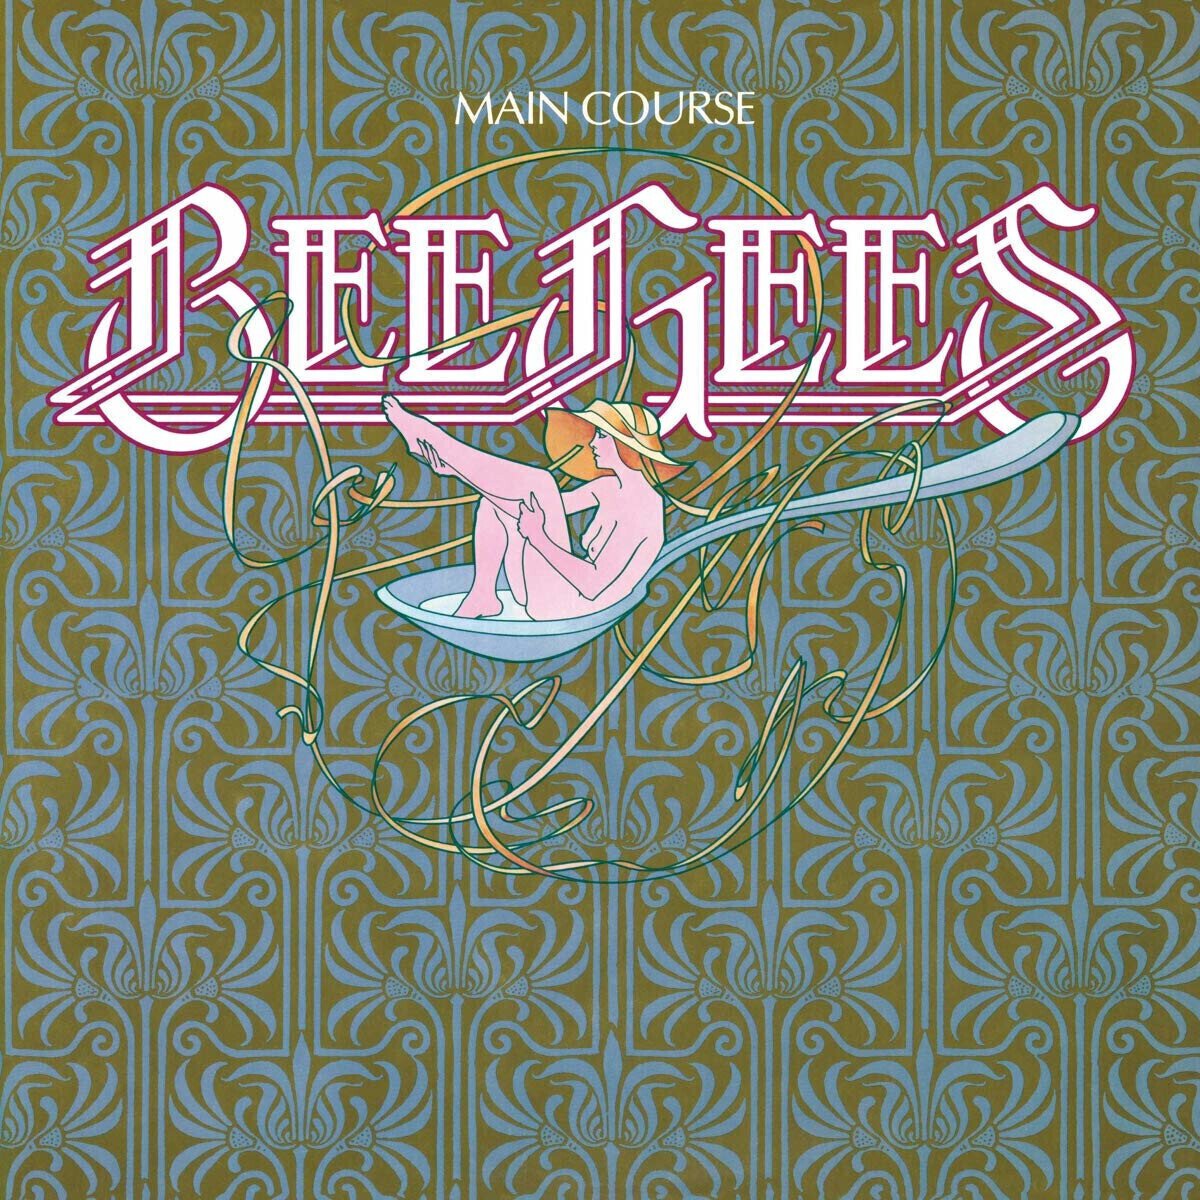 Bee Gees - Main Course (LP) Bee Gees